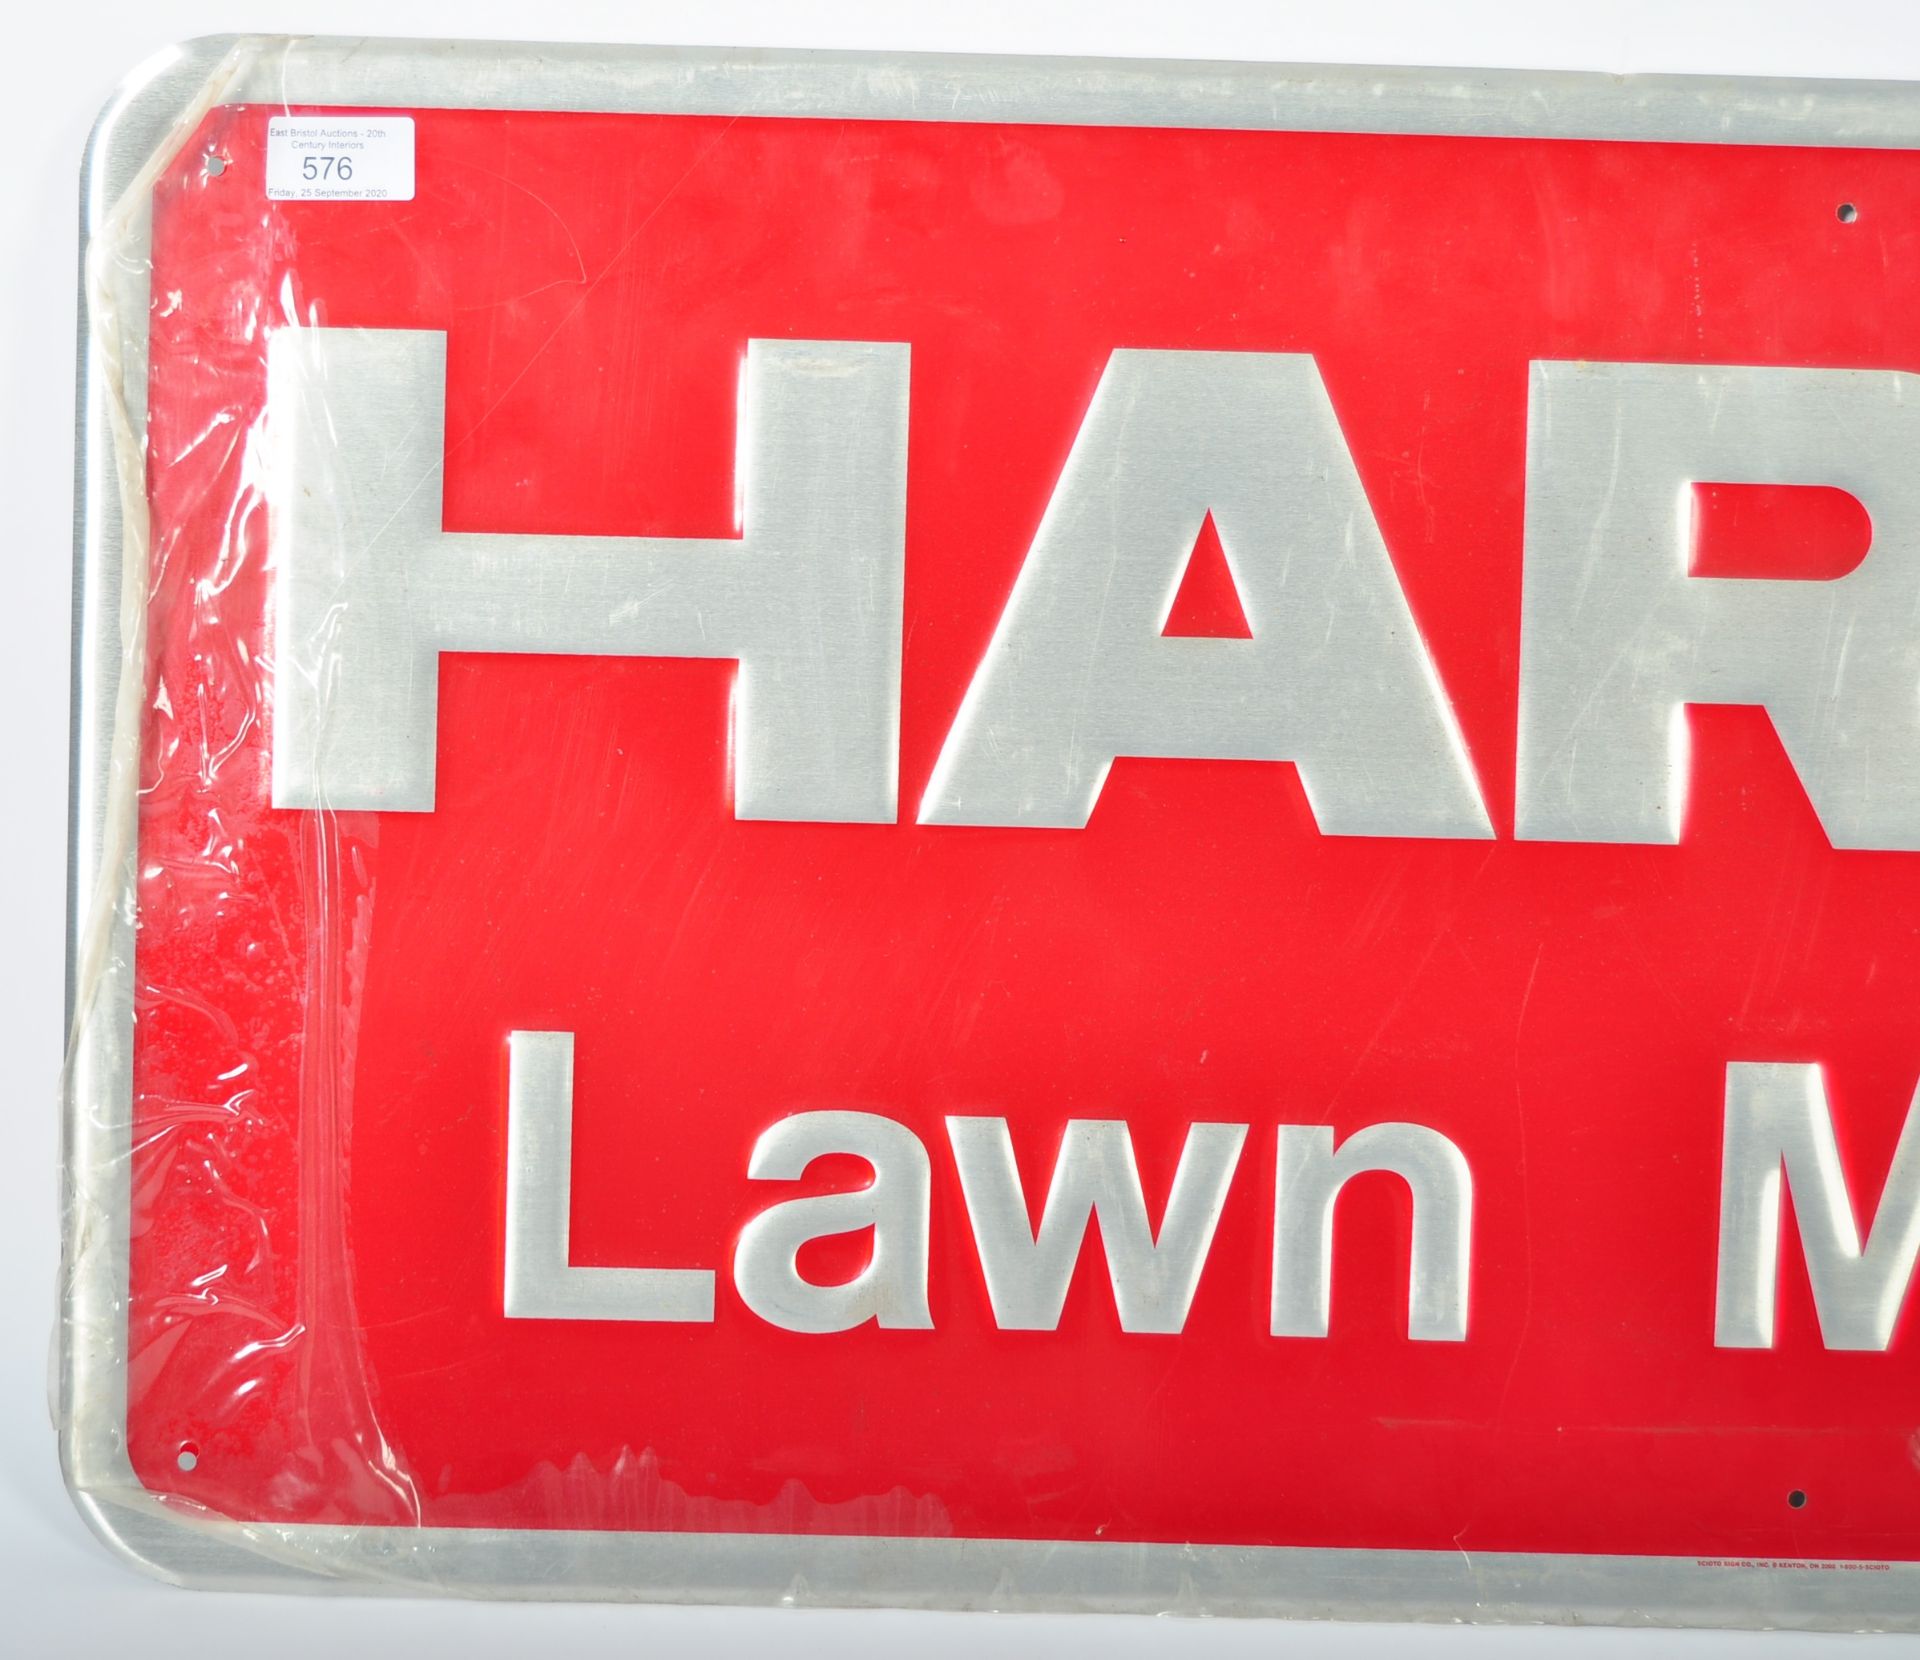 HARRY LAWN MOWERS 1980'S POINT OF SALE ADVERTISING SIGN - Bild 2 aus 4